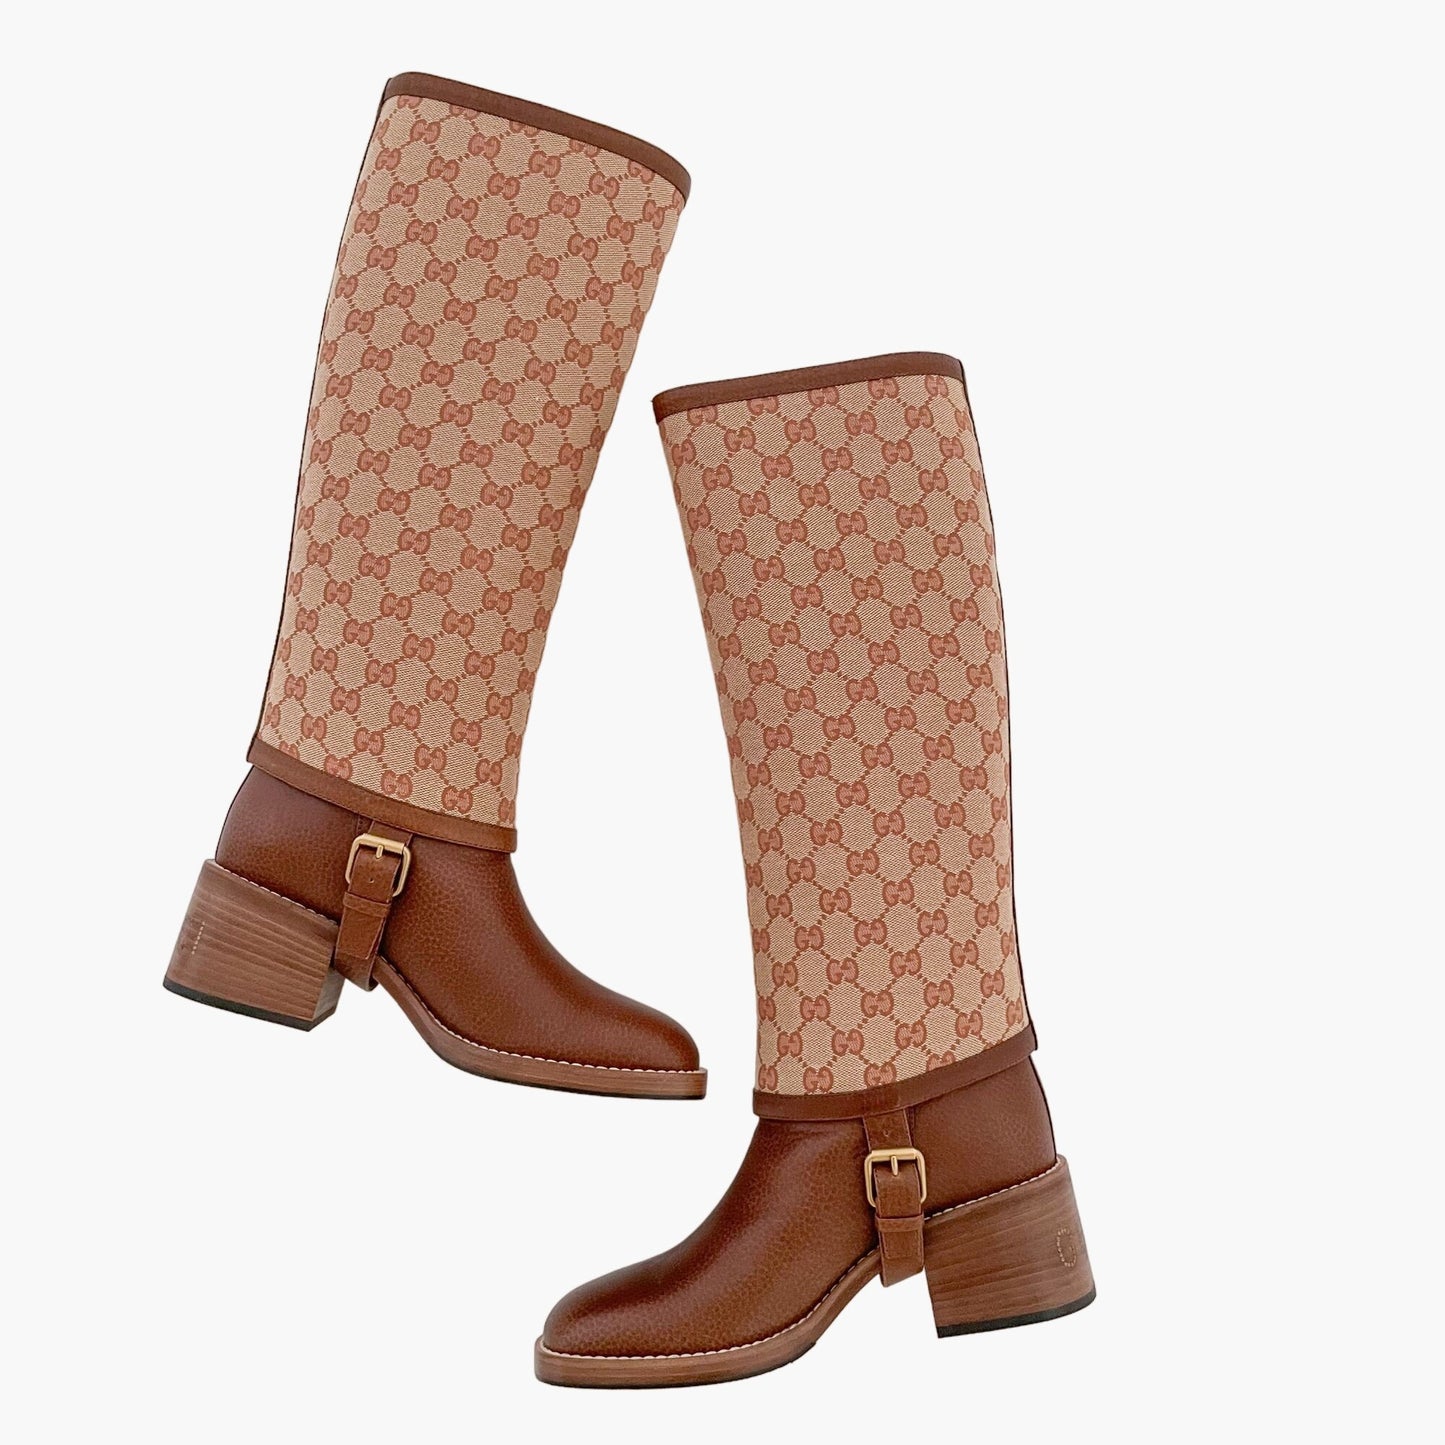 Gucci Lola Riding Boots in Brown Leather / Tan GG Canvas Size 38.5